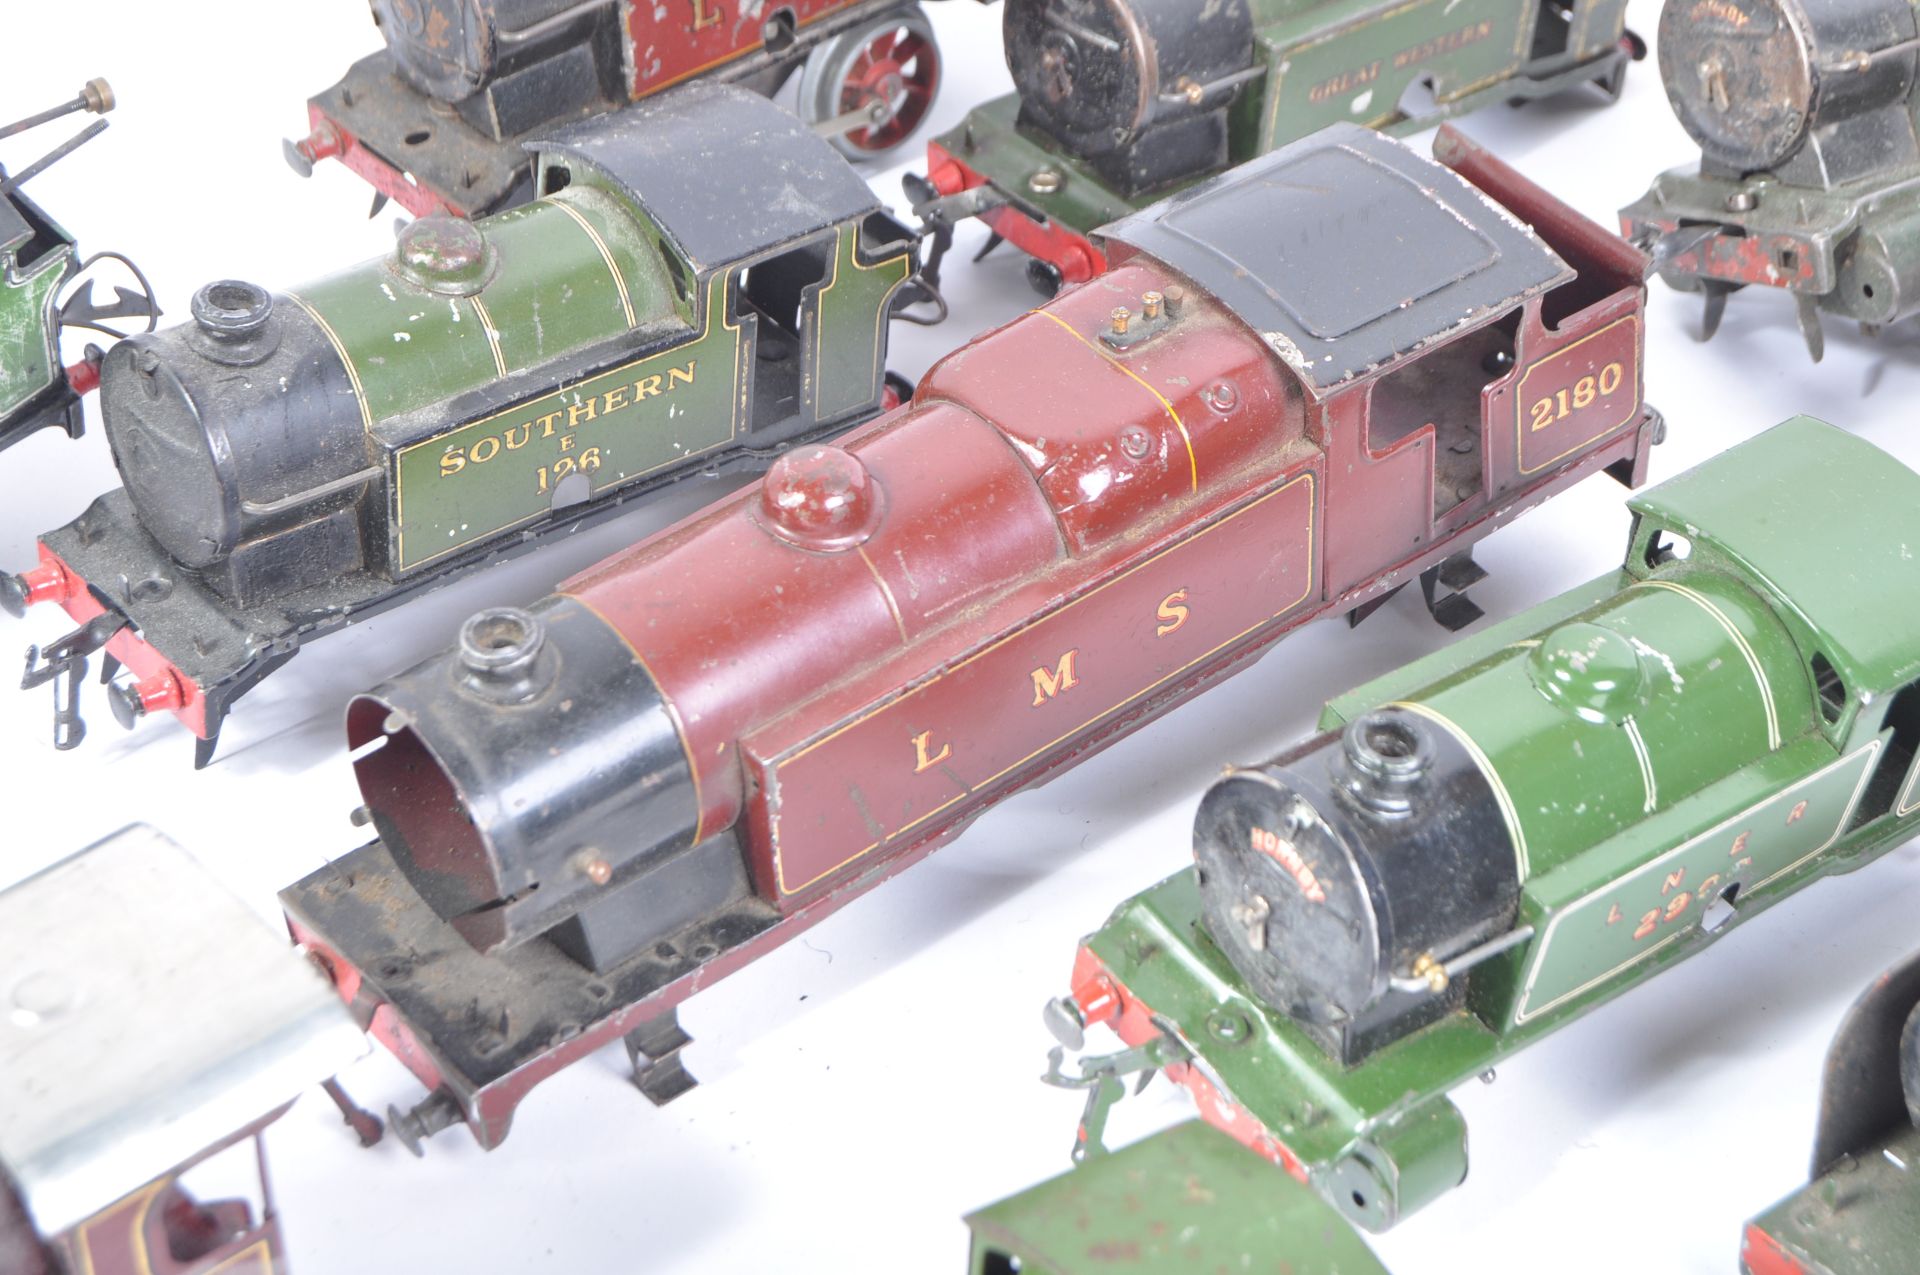 COLLECTION OF HORNBY O GAUGE TINPLATE LOCOMOTIVE BODIES / PARTS - Image 4 of 9